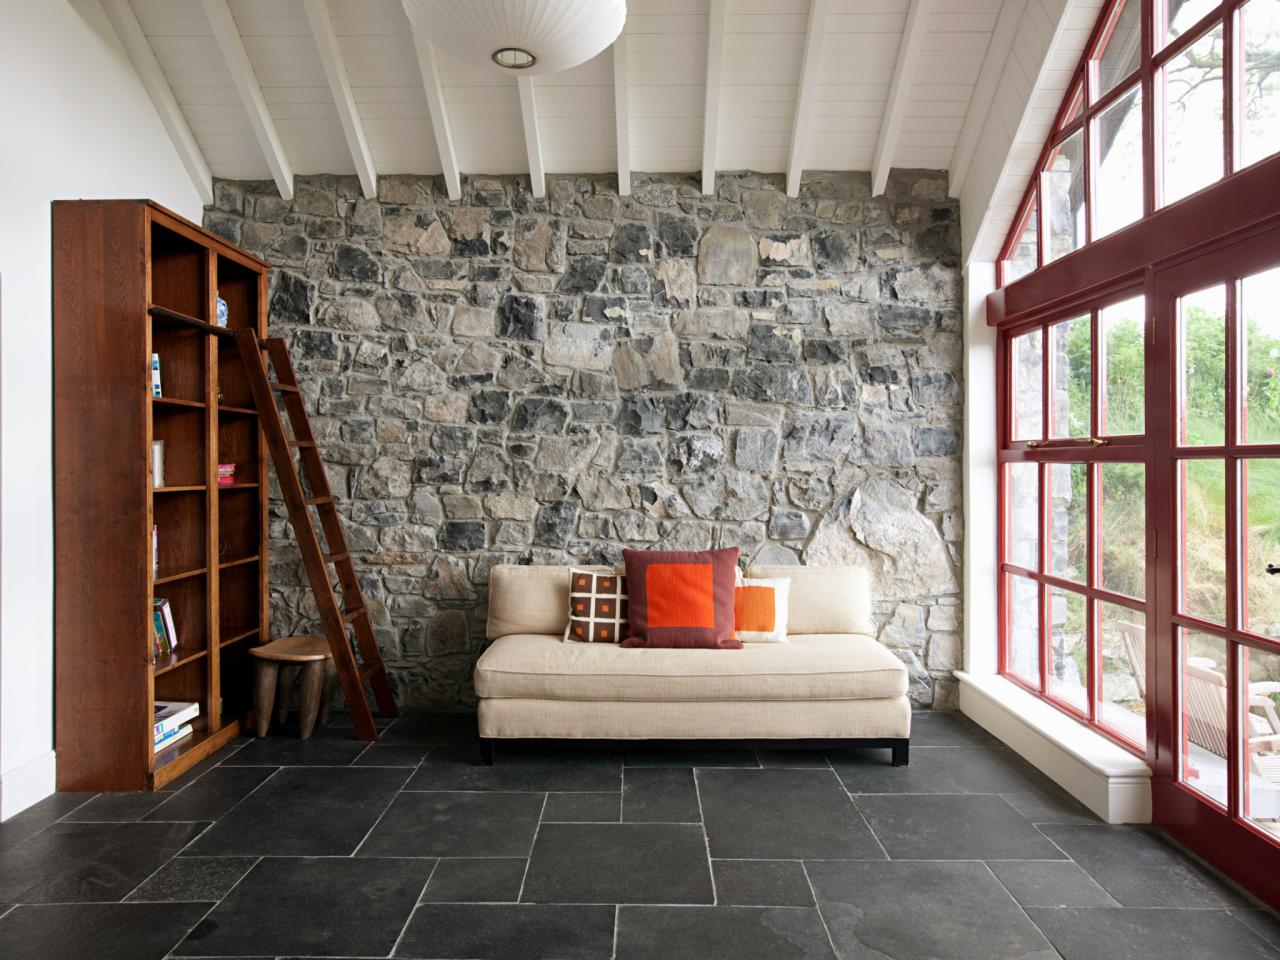 How to Remove Slate Tile from Concrete Floor: A DIY Guide